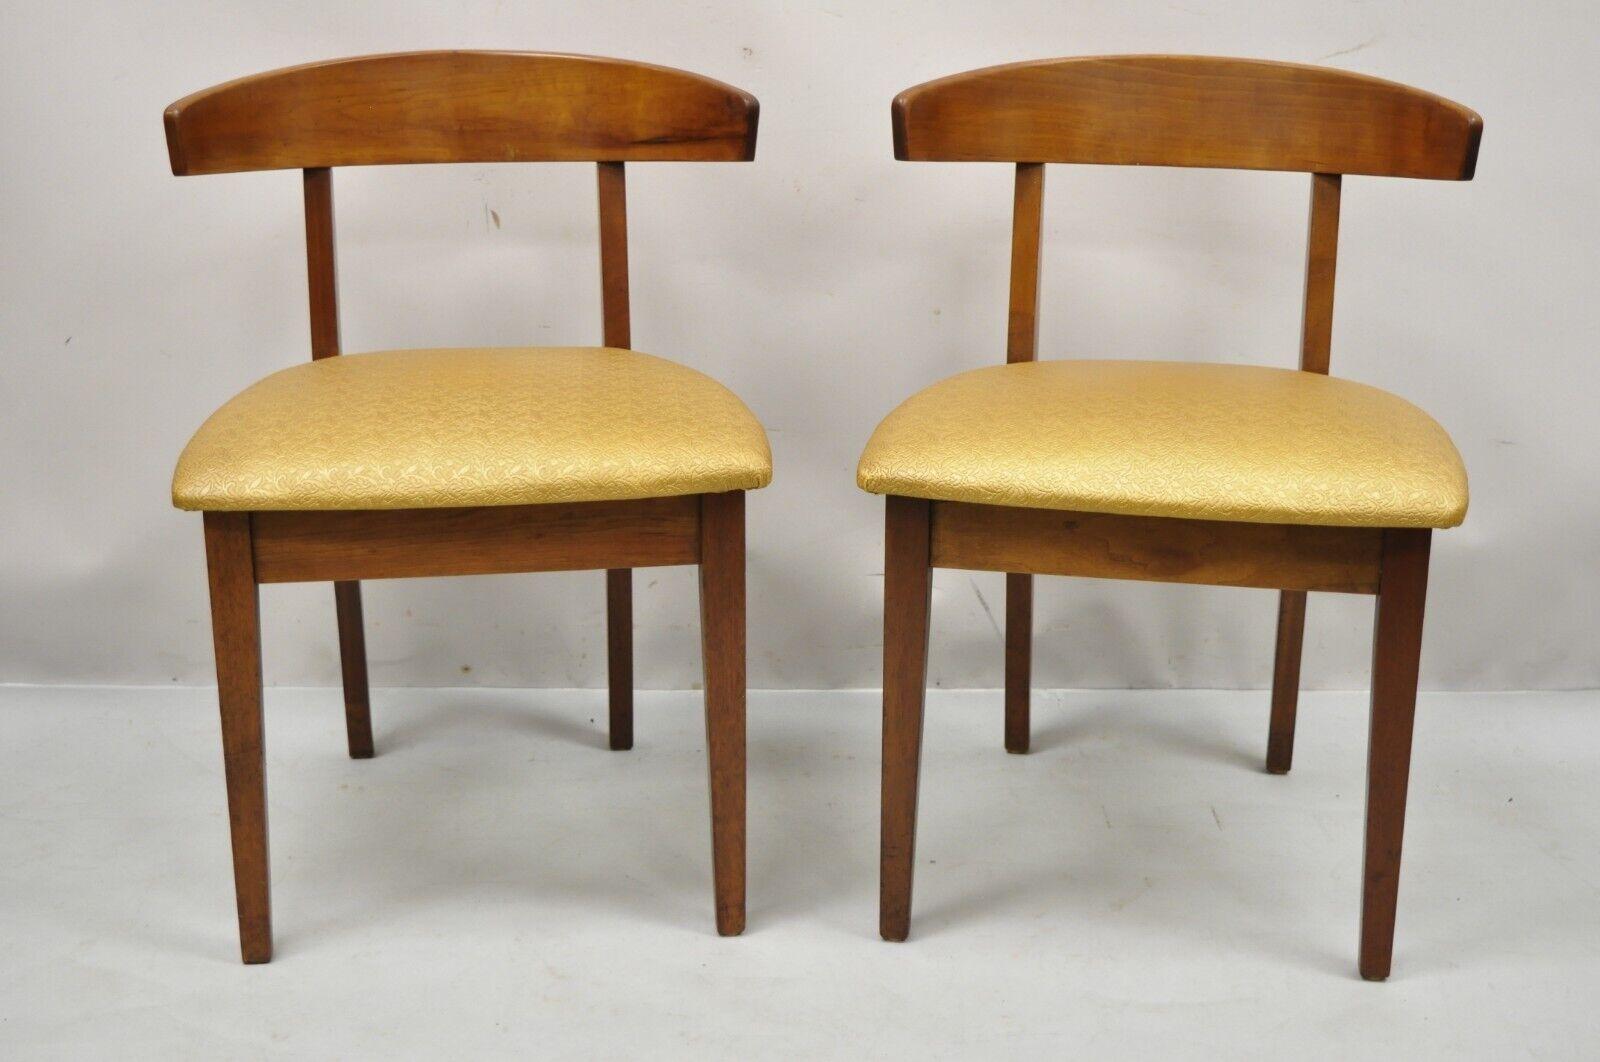 Mid-Century Modern cherry wood curved back hoof leg side chair - a pair. Item features curved backs, beautiful wood grain, tapered legs, very nice vintage item, great style and form. Circa mid 20th century. Measurements: 29.25